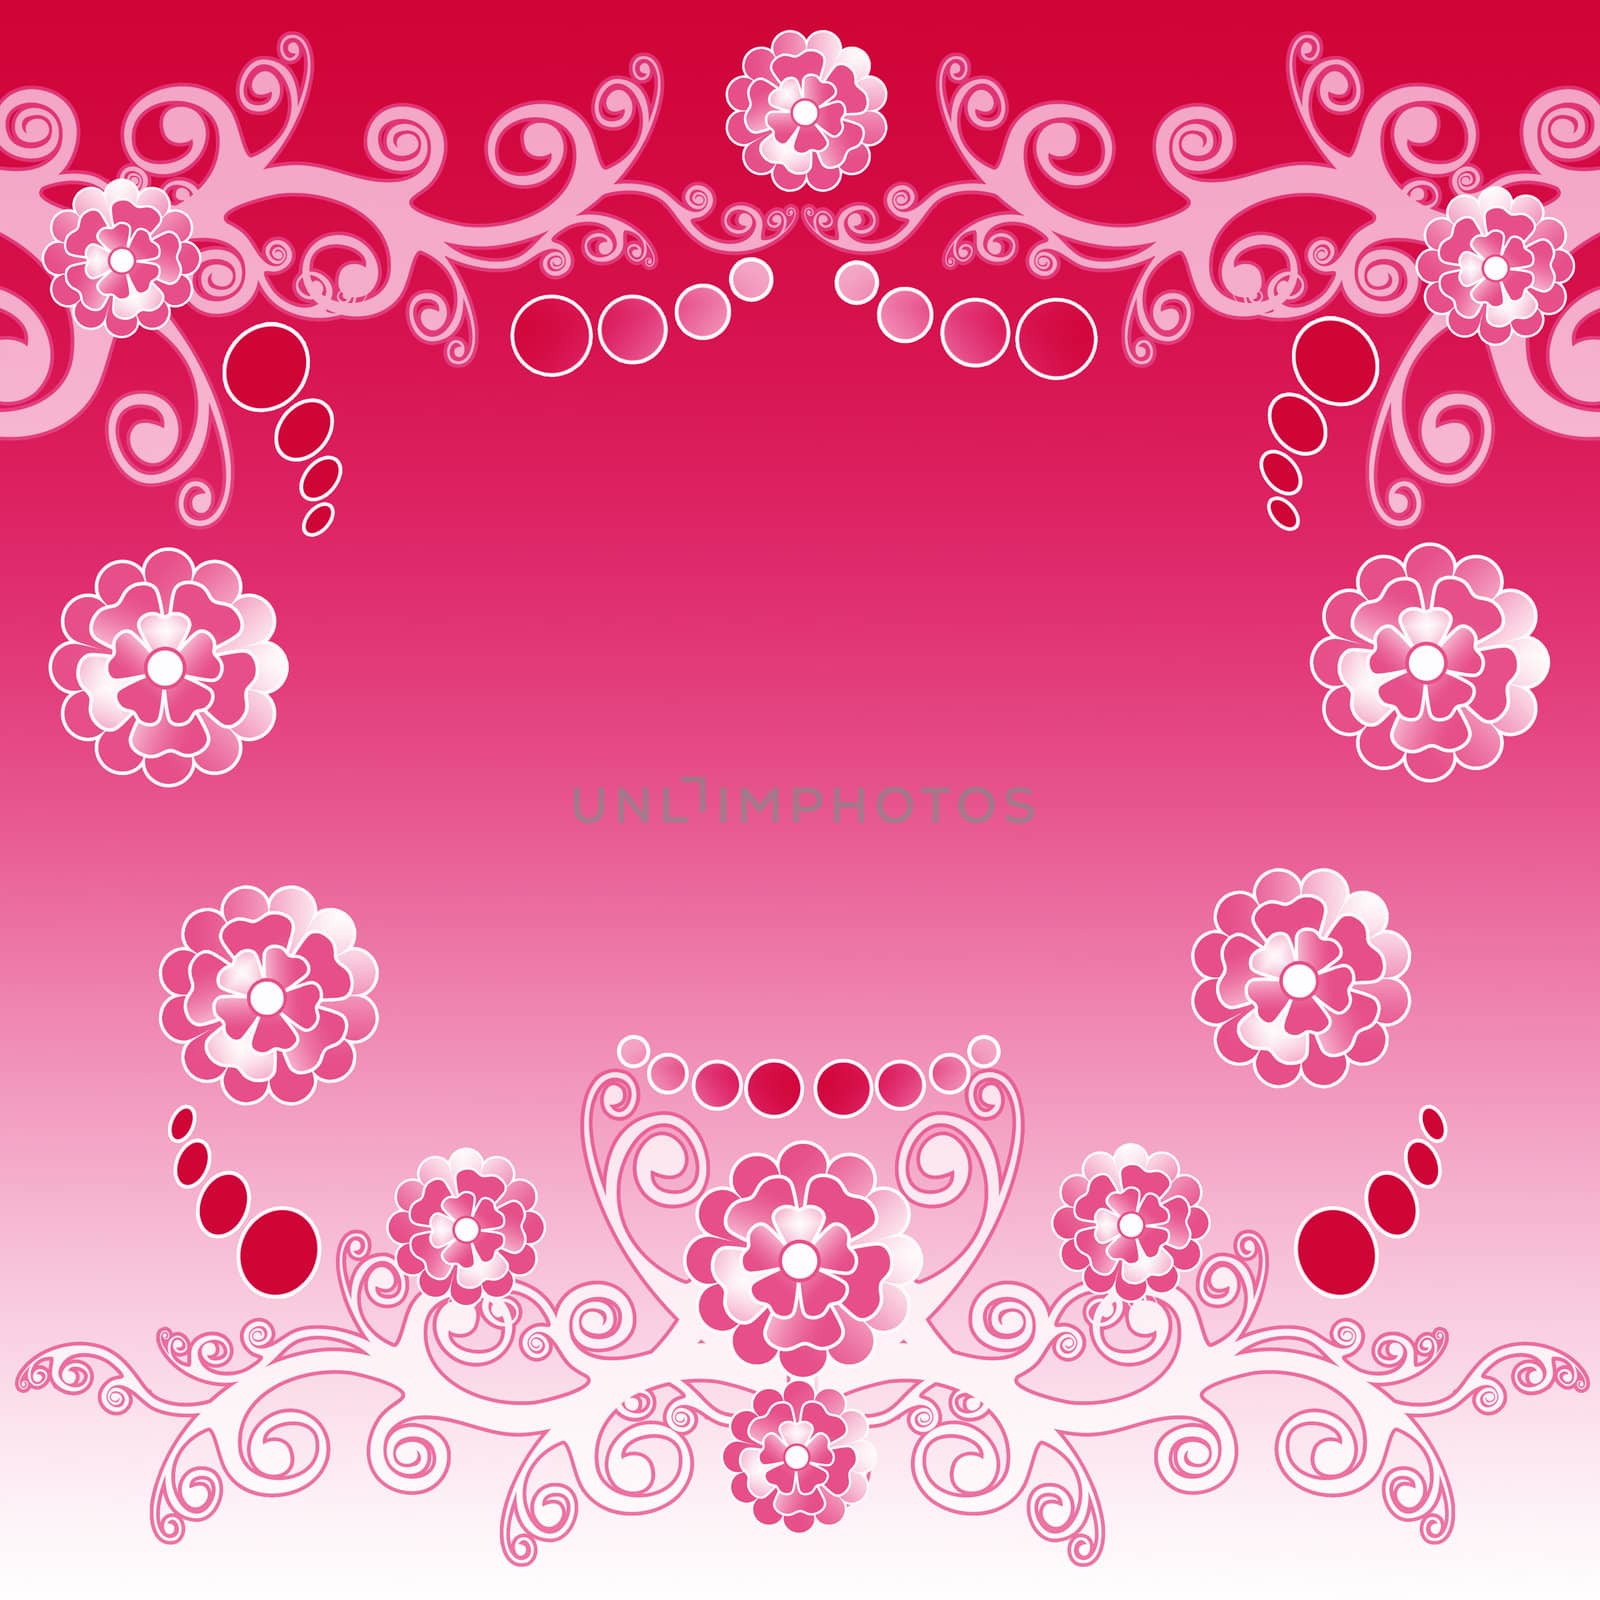 pink funky background by Maya